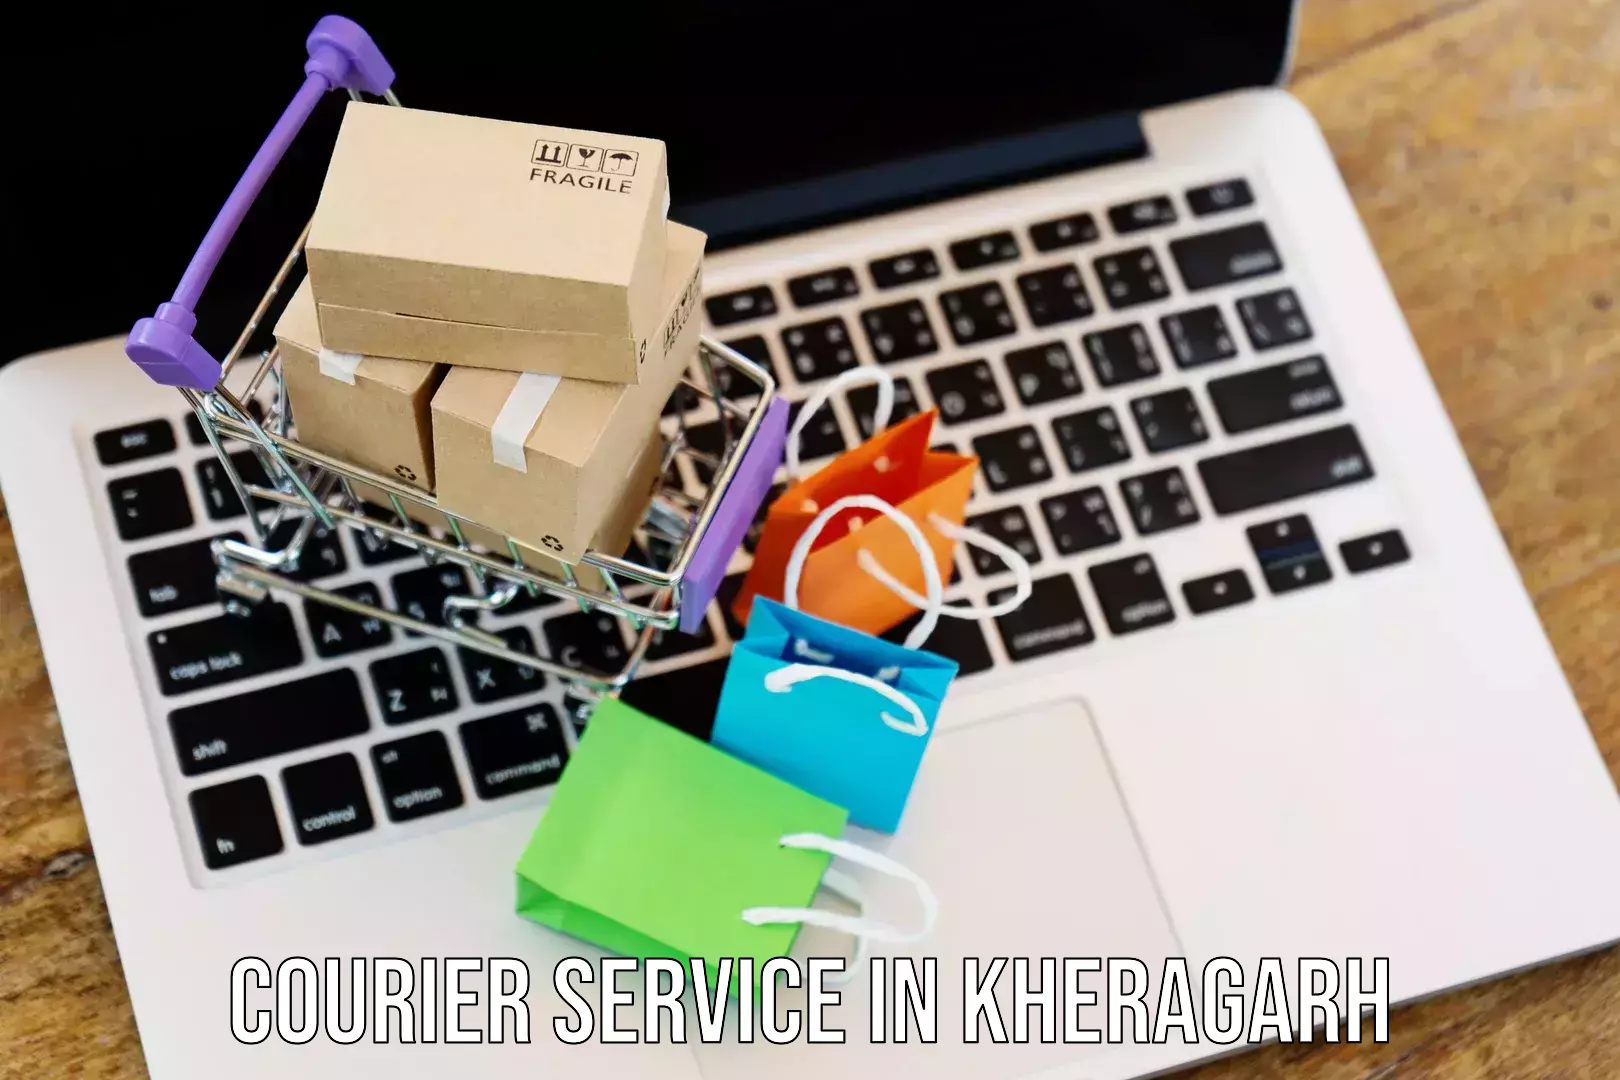 On-call courier service in Kheragarh